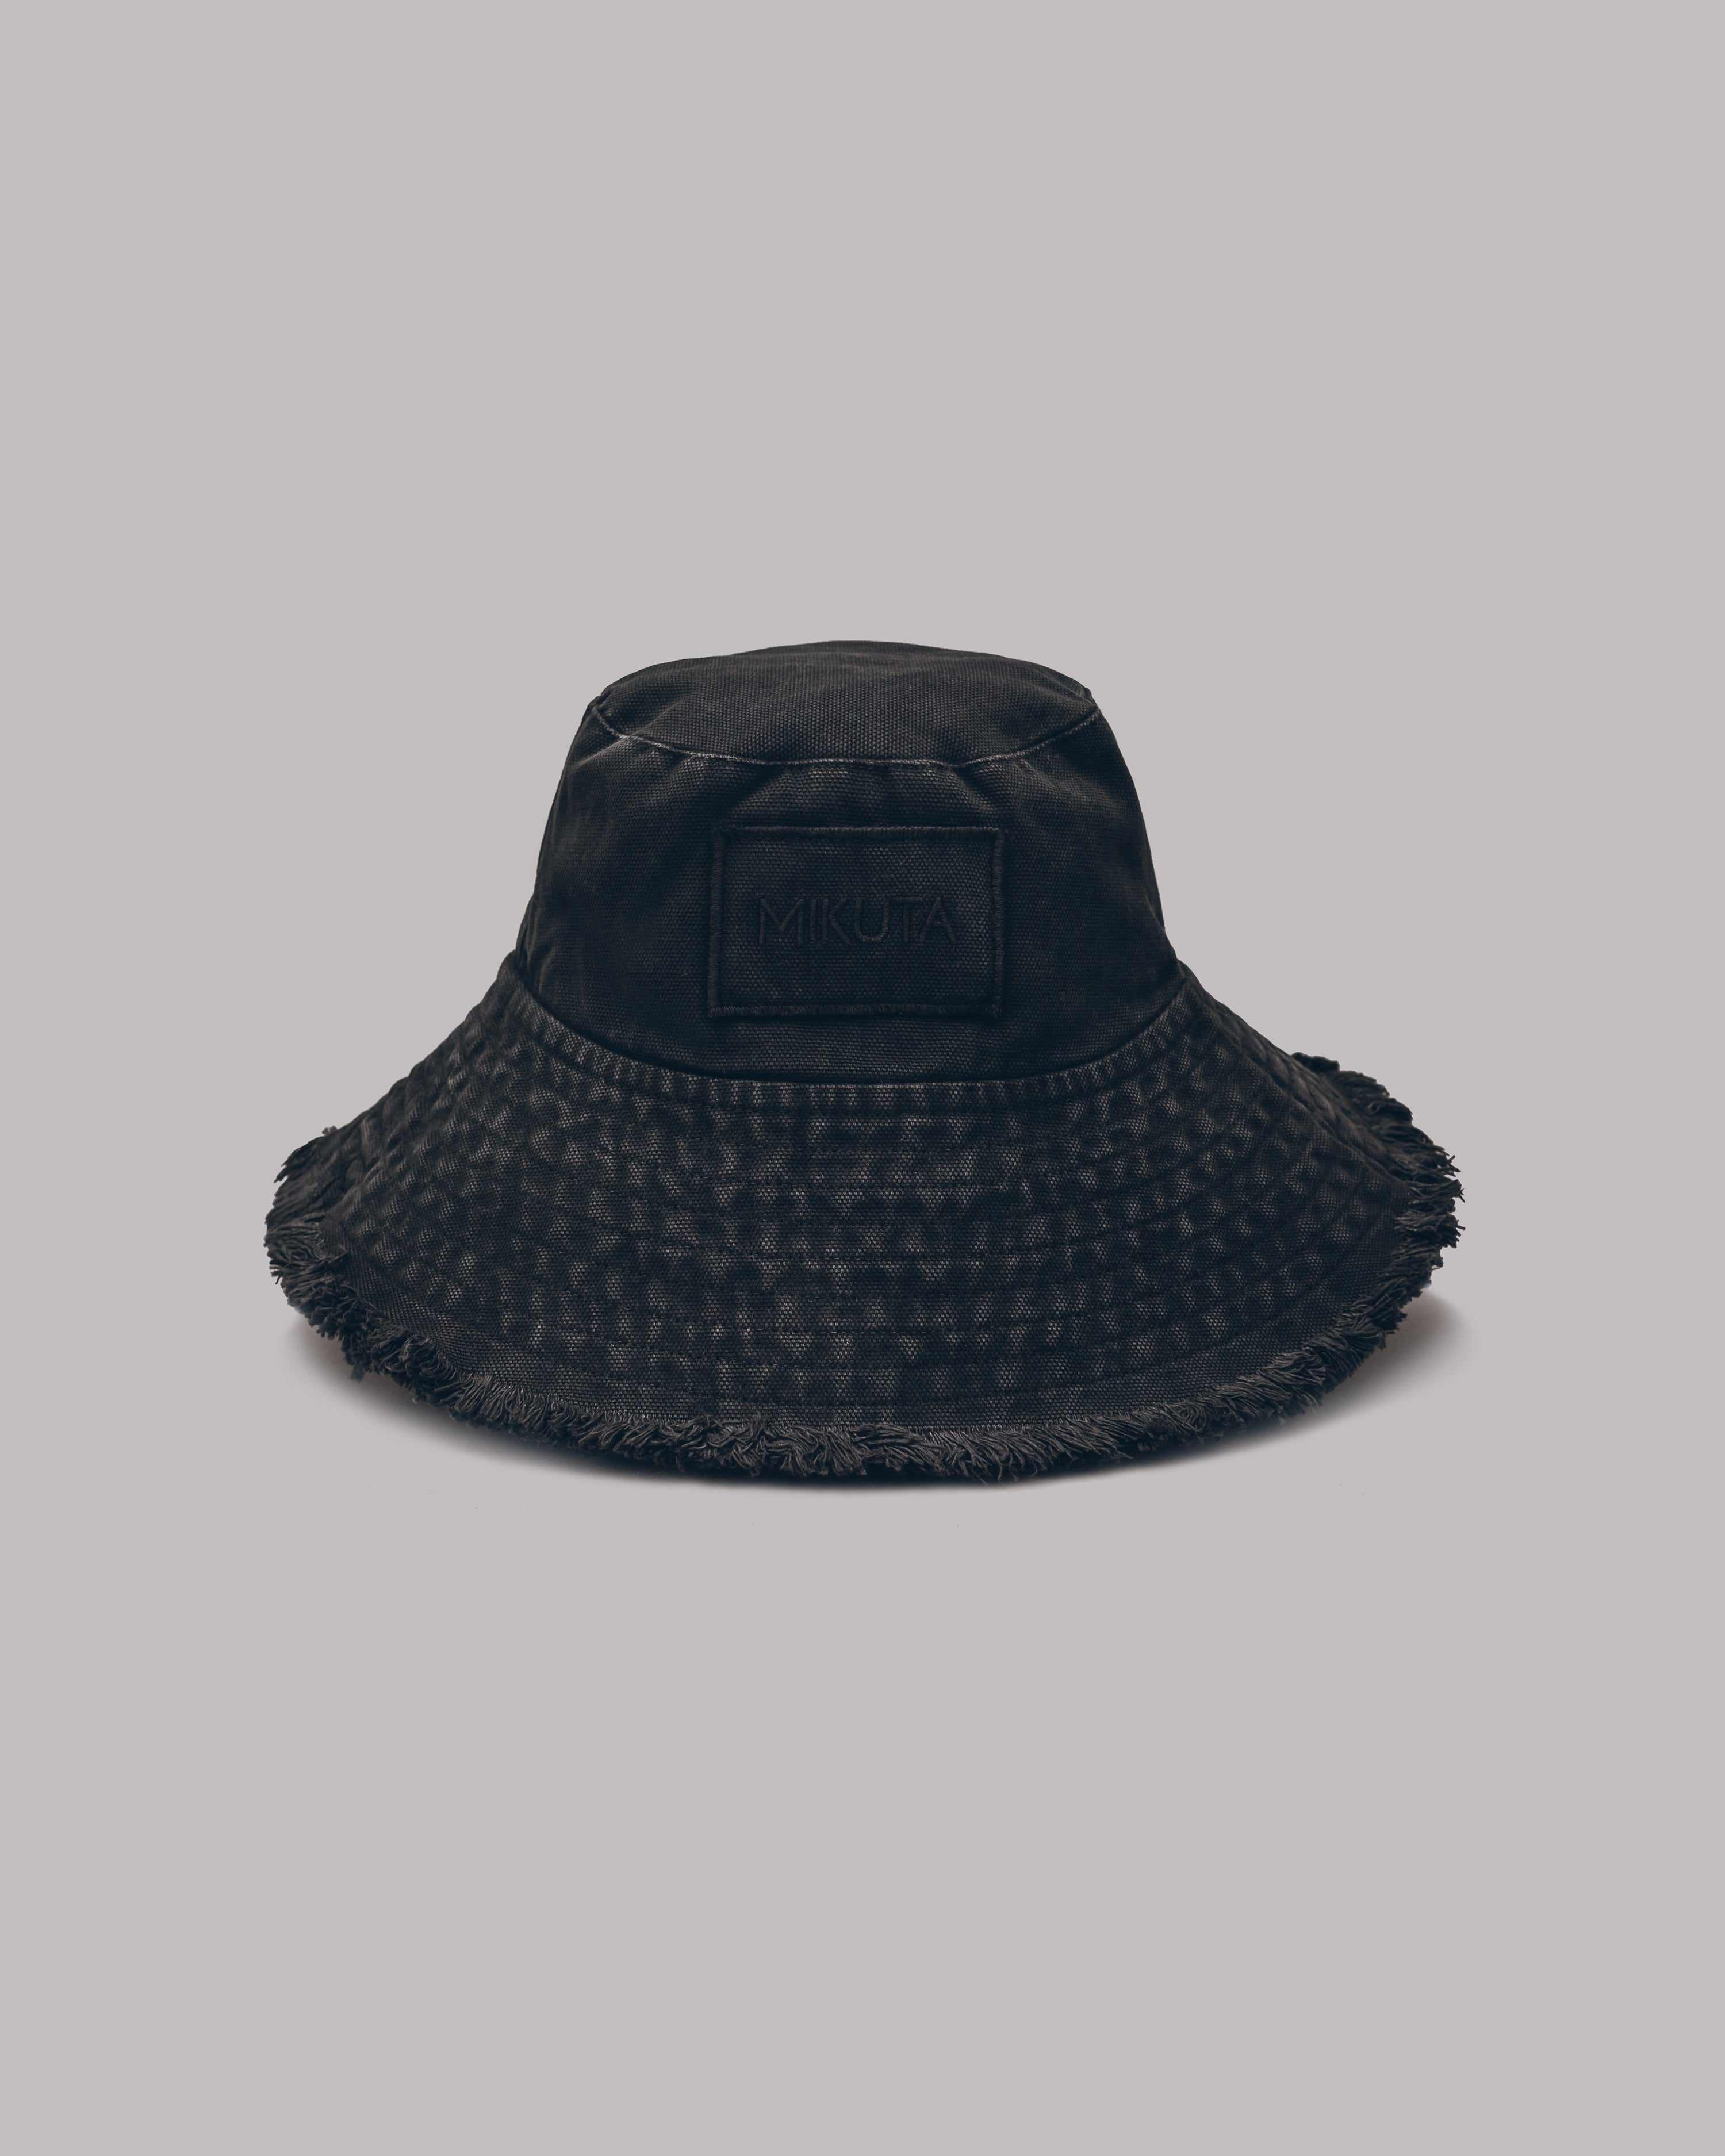 The Charcoal Bucket Hat